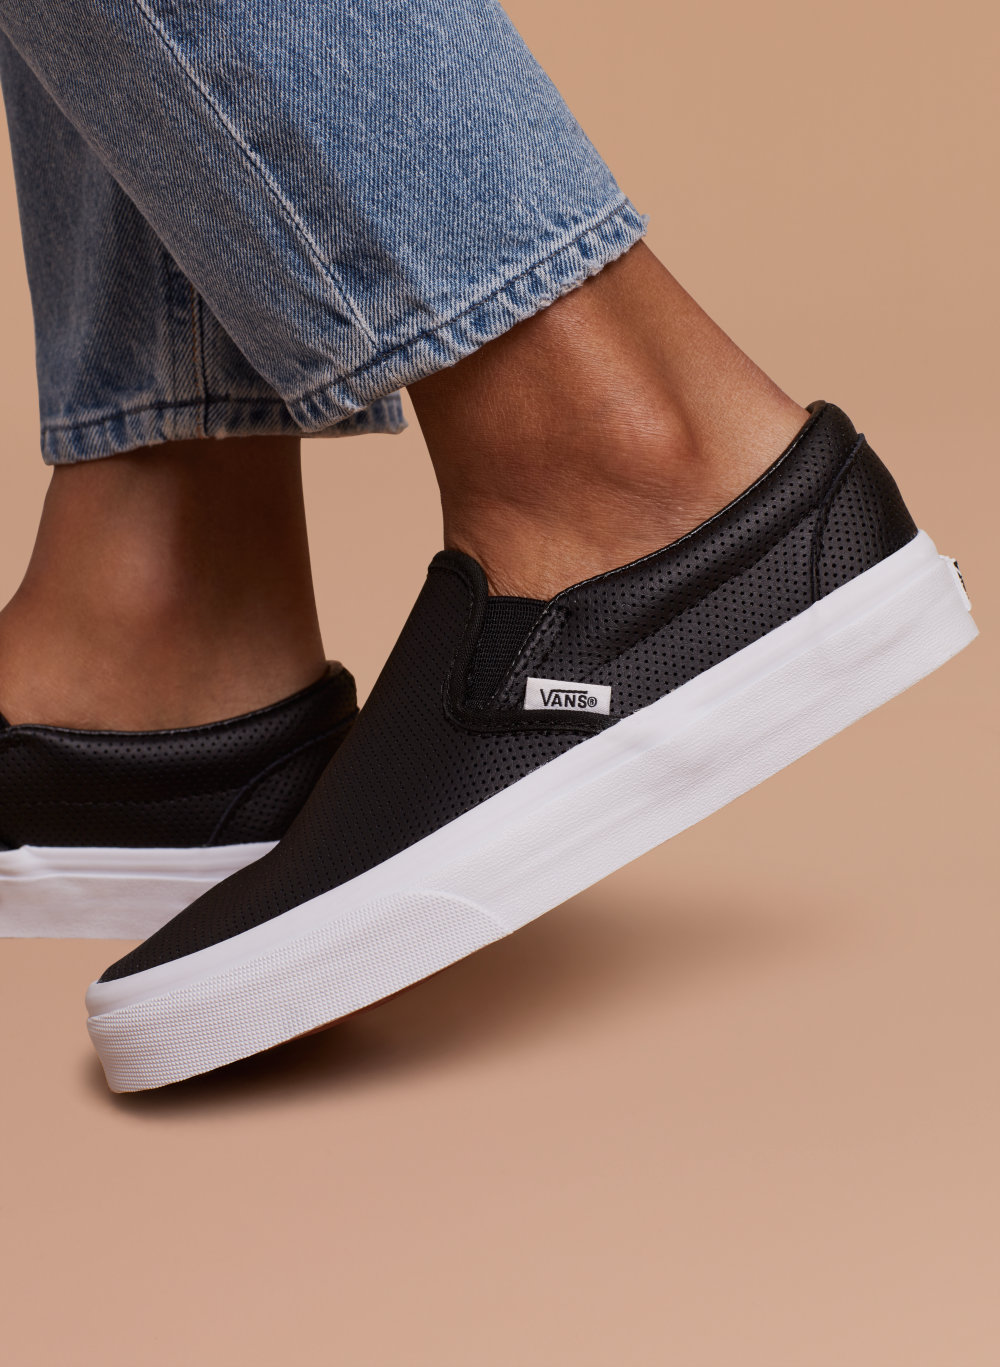 vans black perforated leather slip on womens